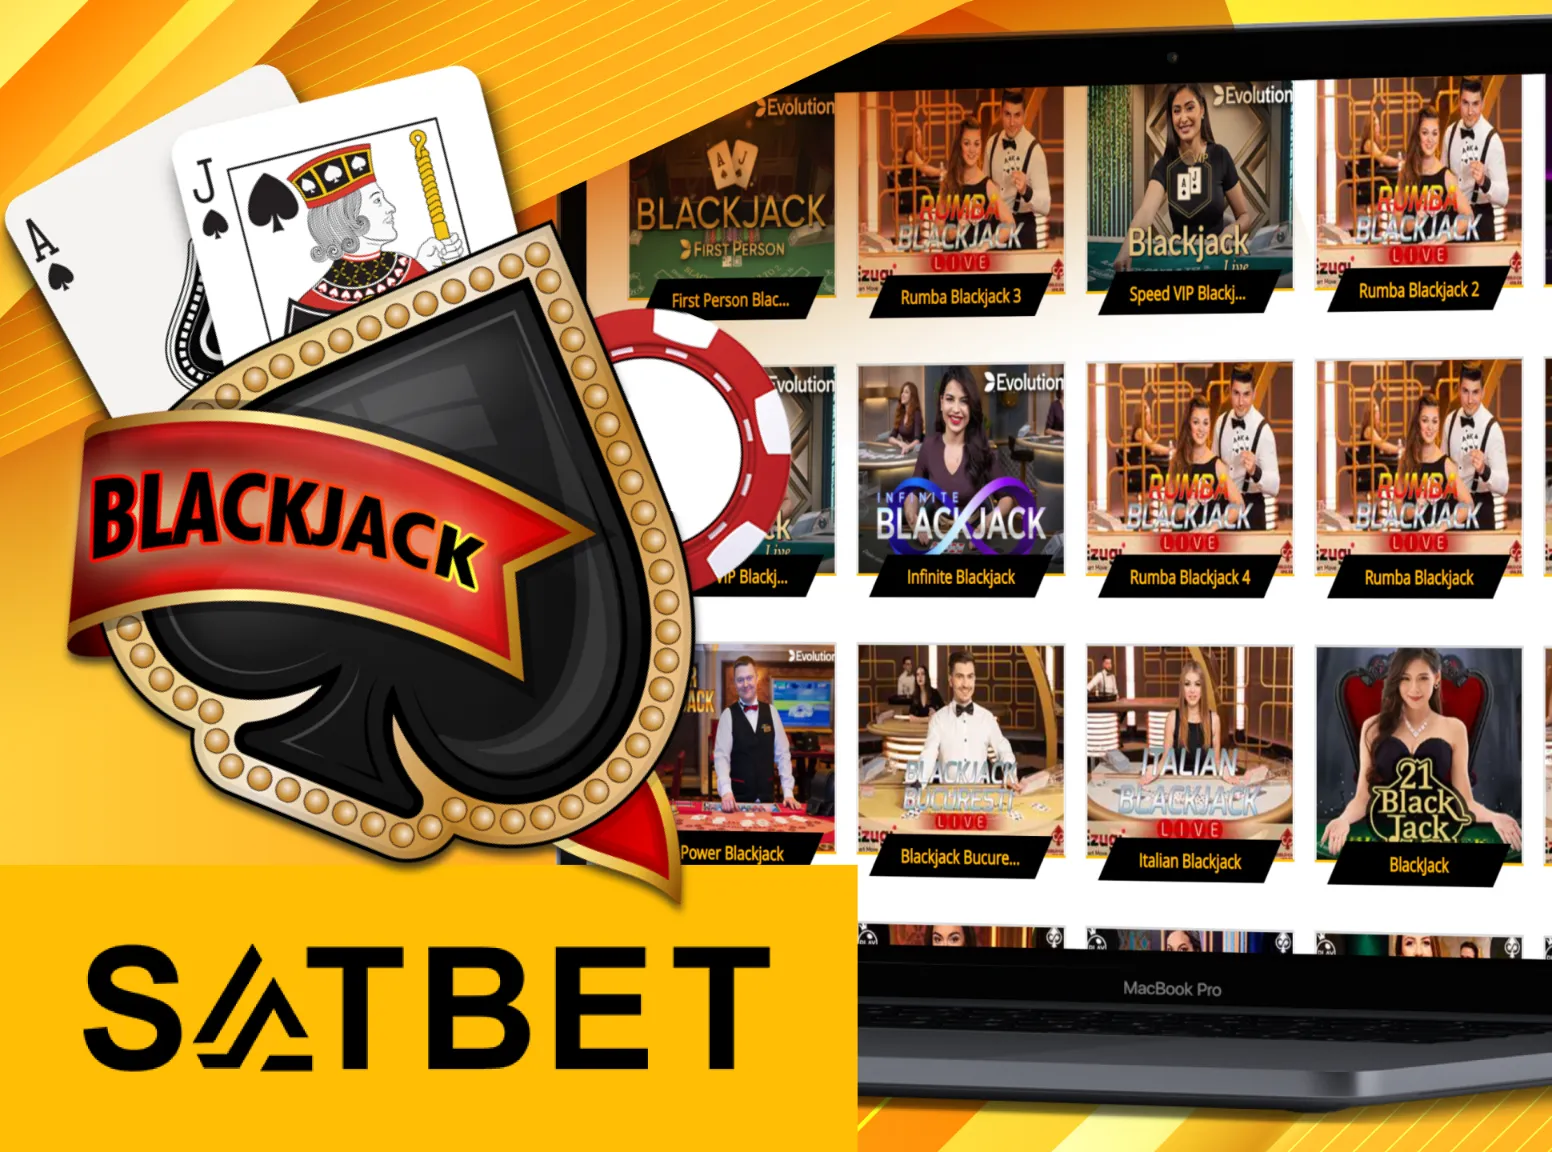 Play blackjack games with real people at Satbet.